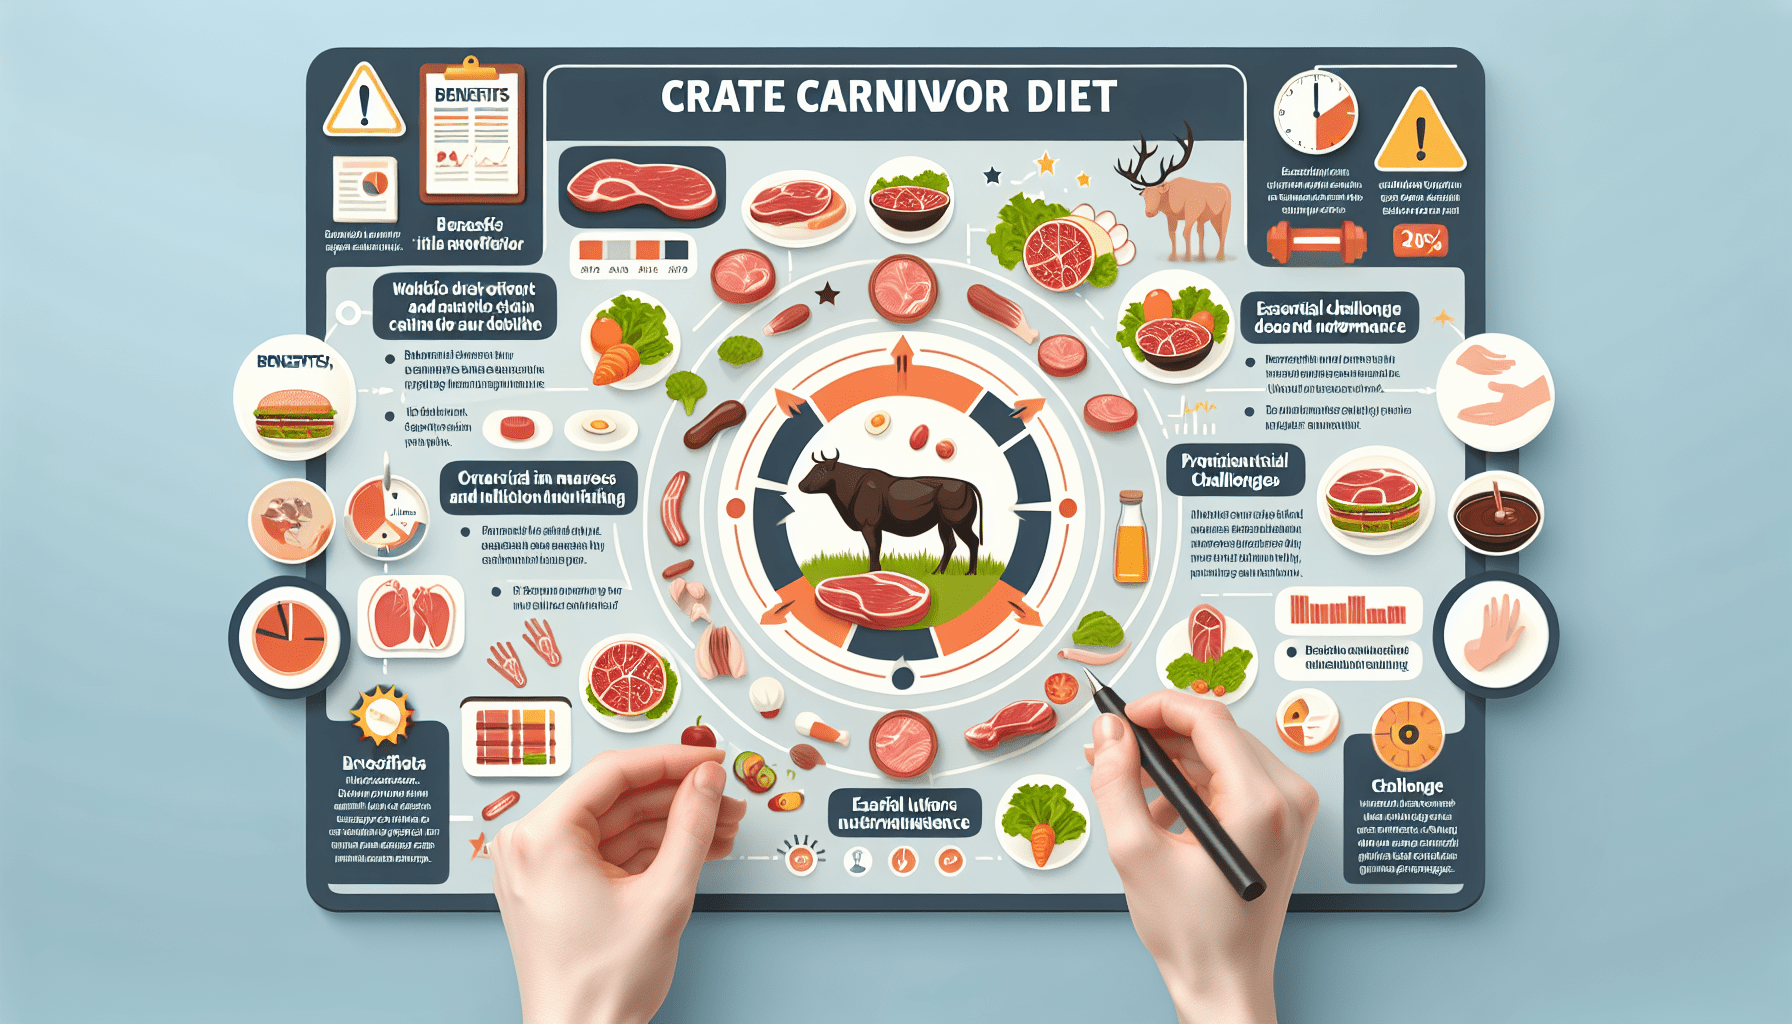 The Ultimate Beginner’s Guide to Optimizing Health and Performance on a Carnivore Diet